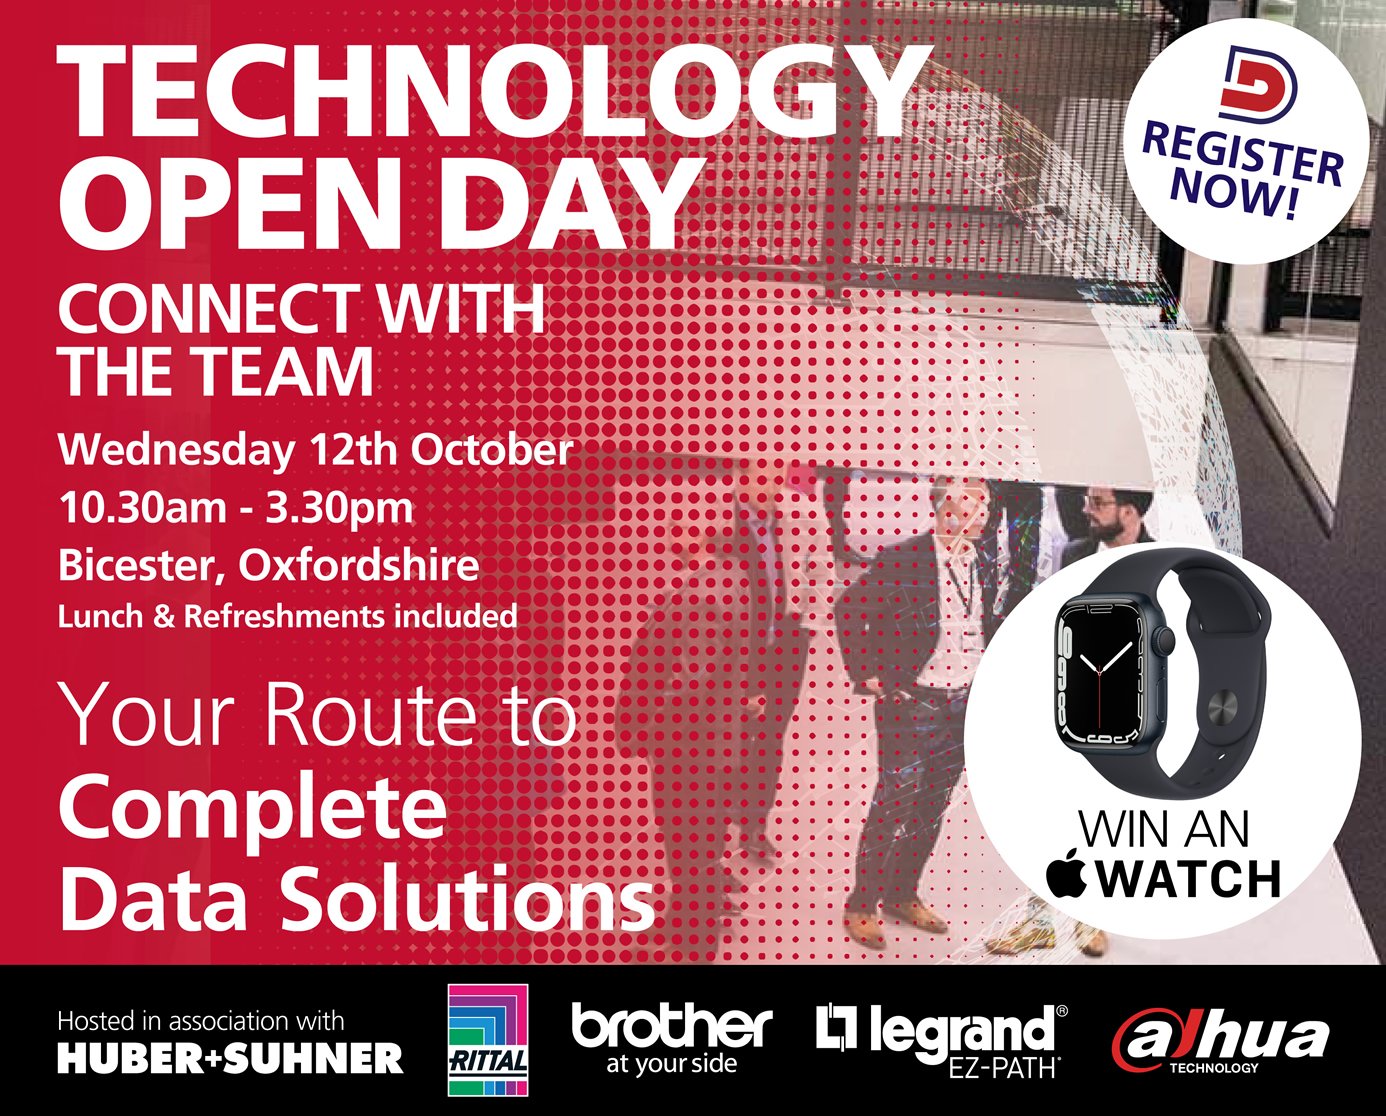 Technology Open Day. Connect with the team. Wednesday 12th October 10:30am - 3:30pm. Bicester, Oxfordshire. Lunch and Refreshments included. Win an apple watch. Register Now!